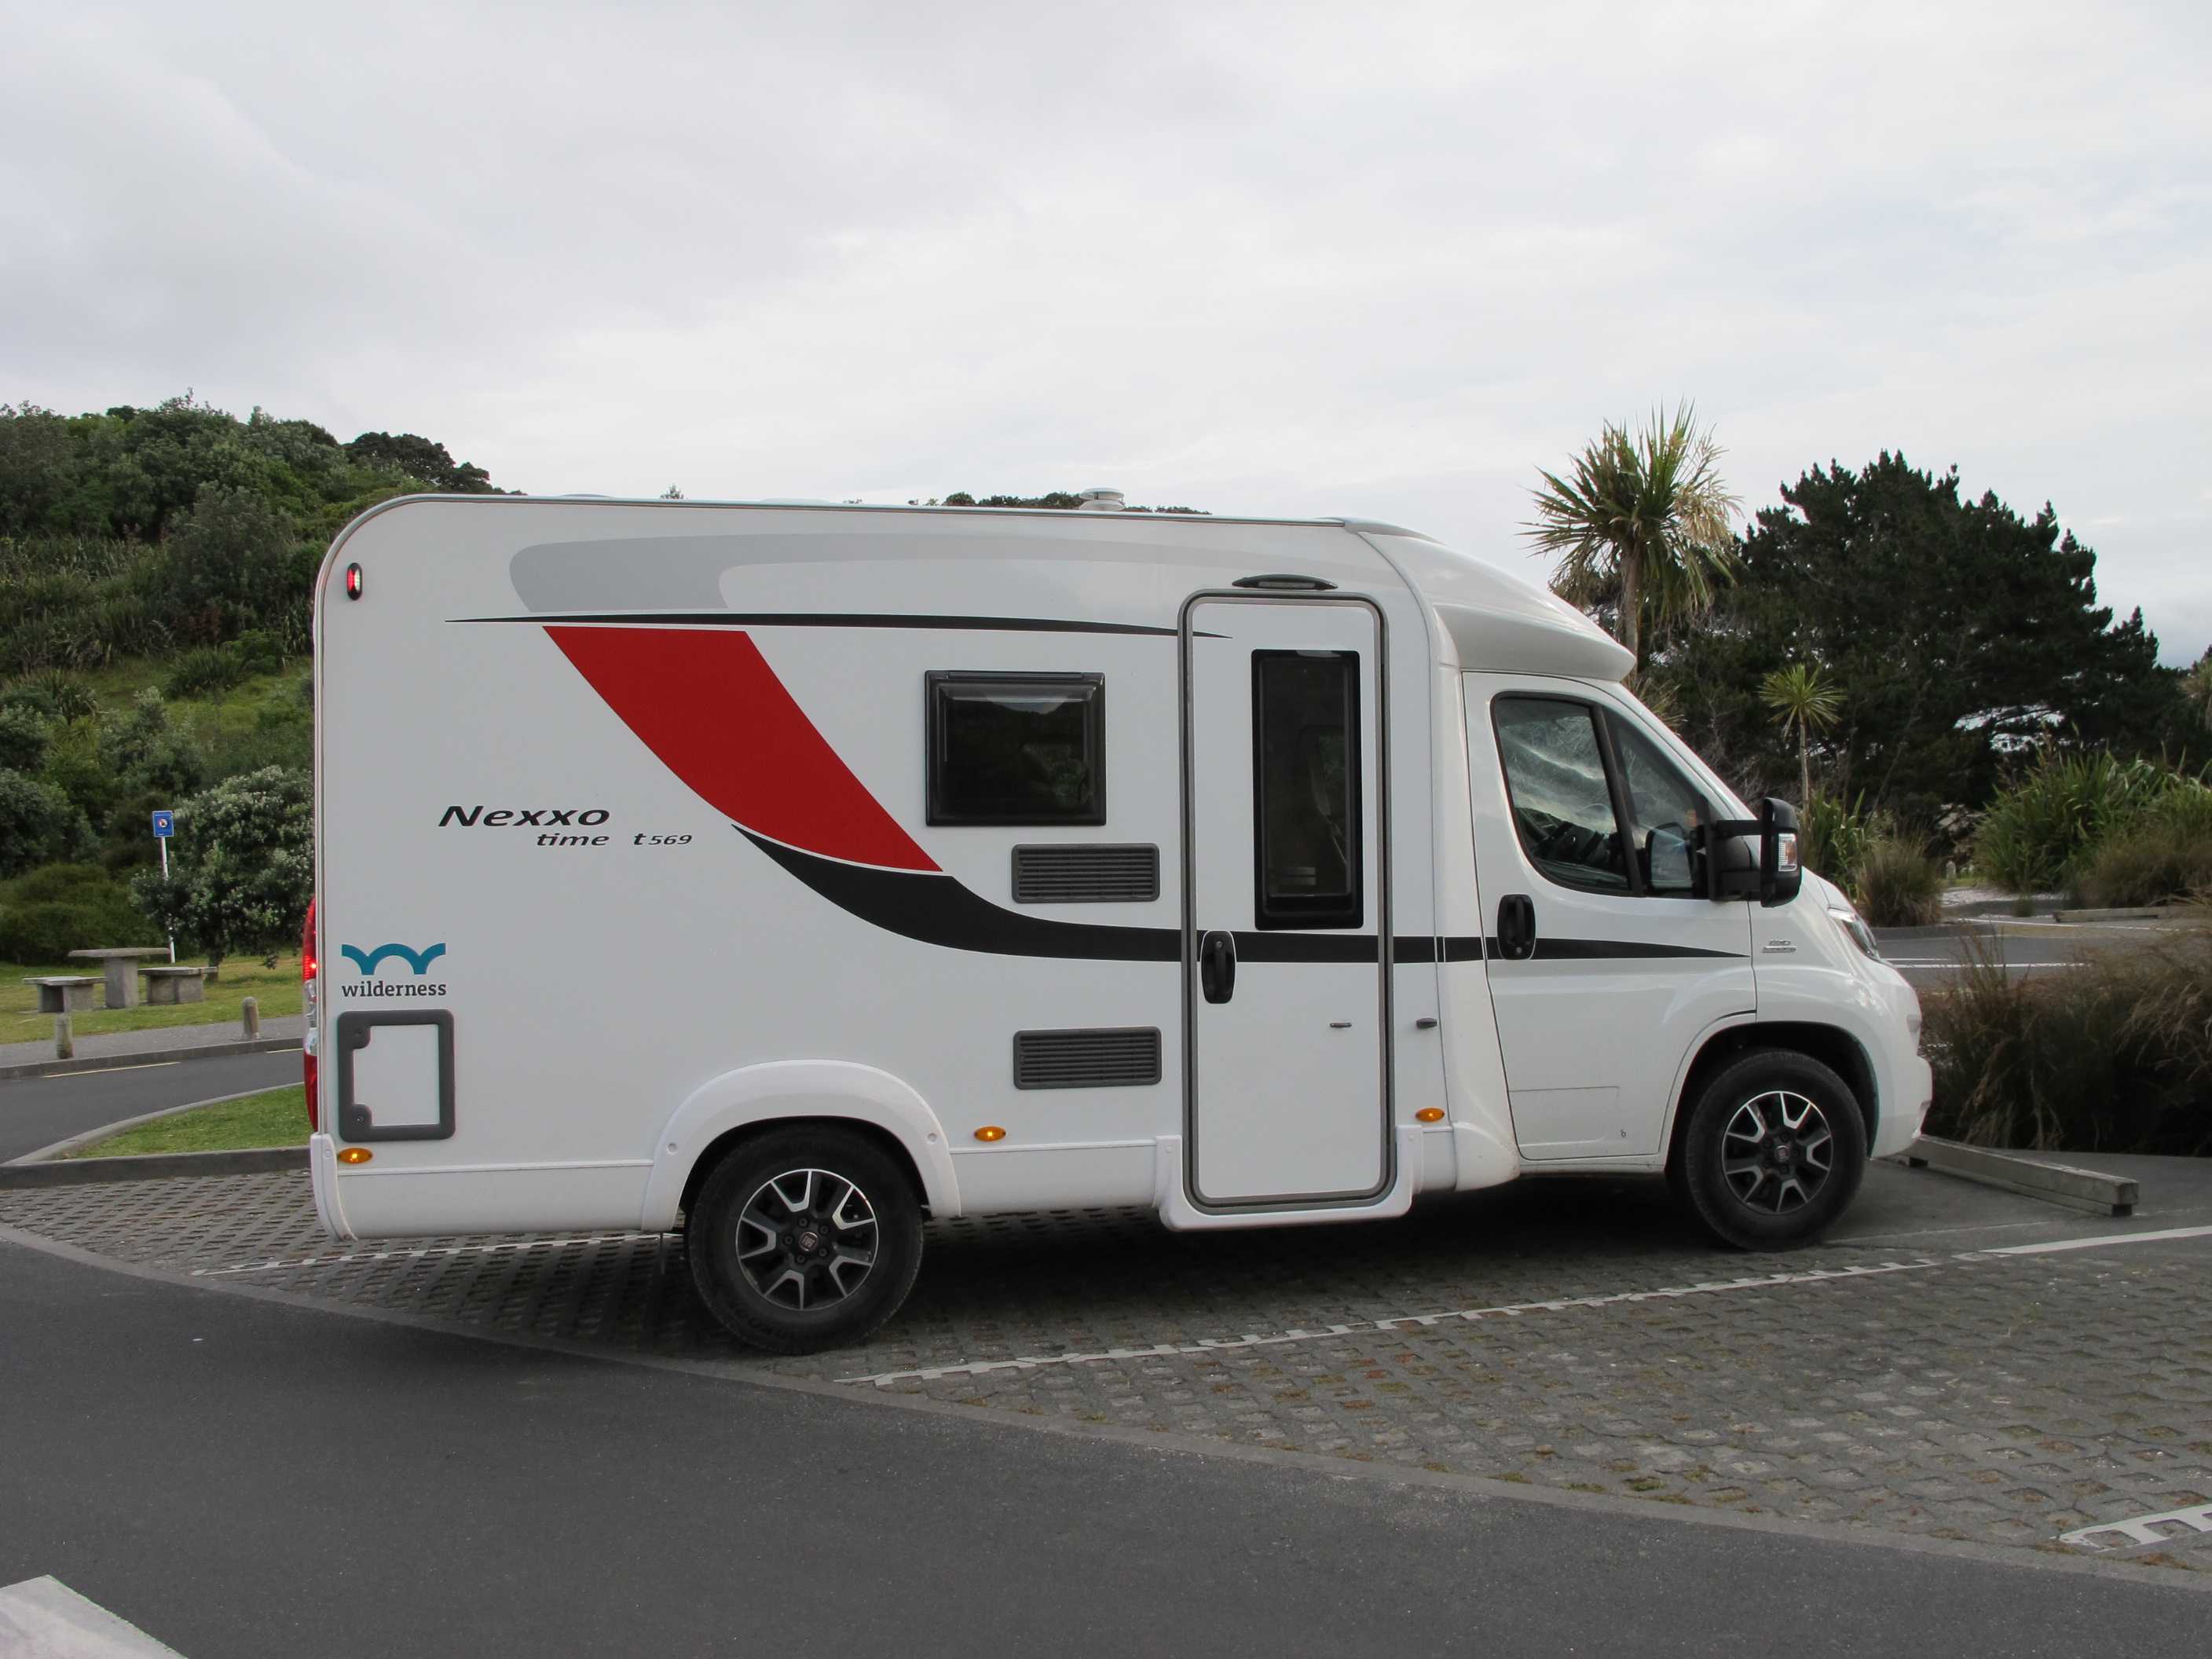 Our Motorhome-Nessie